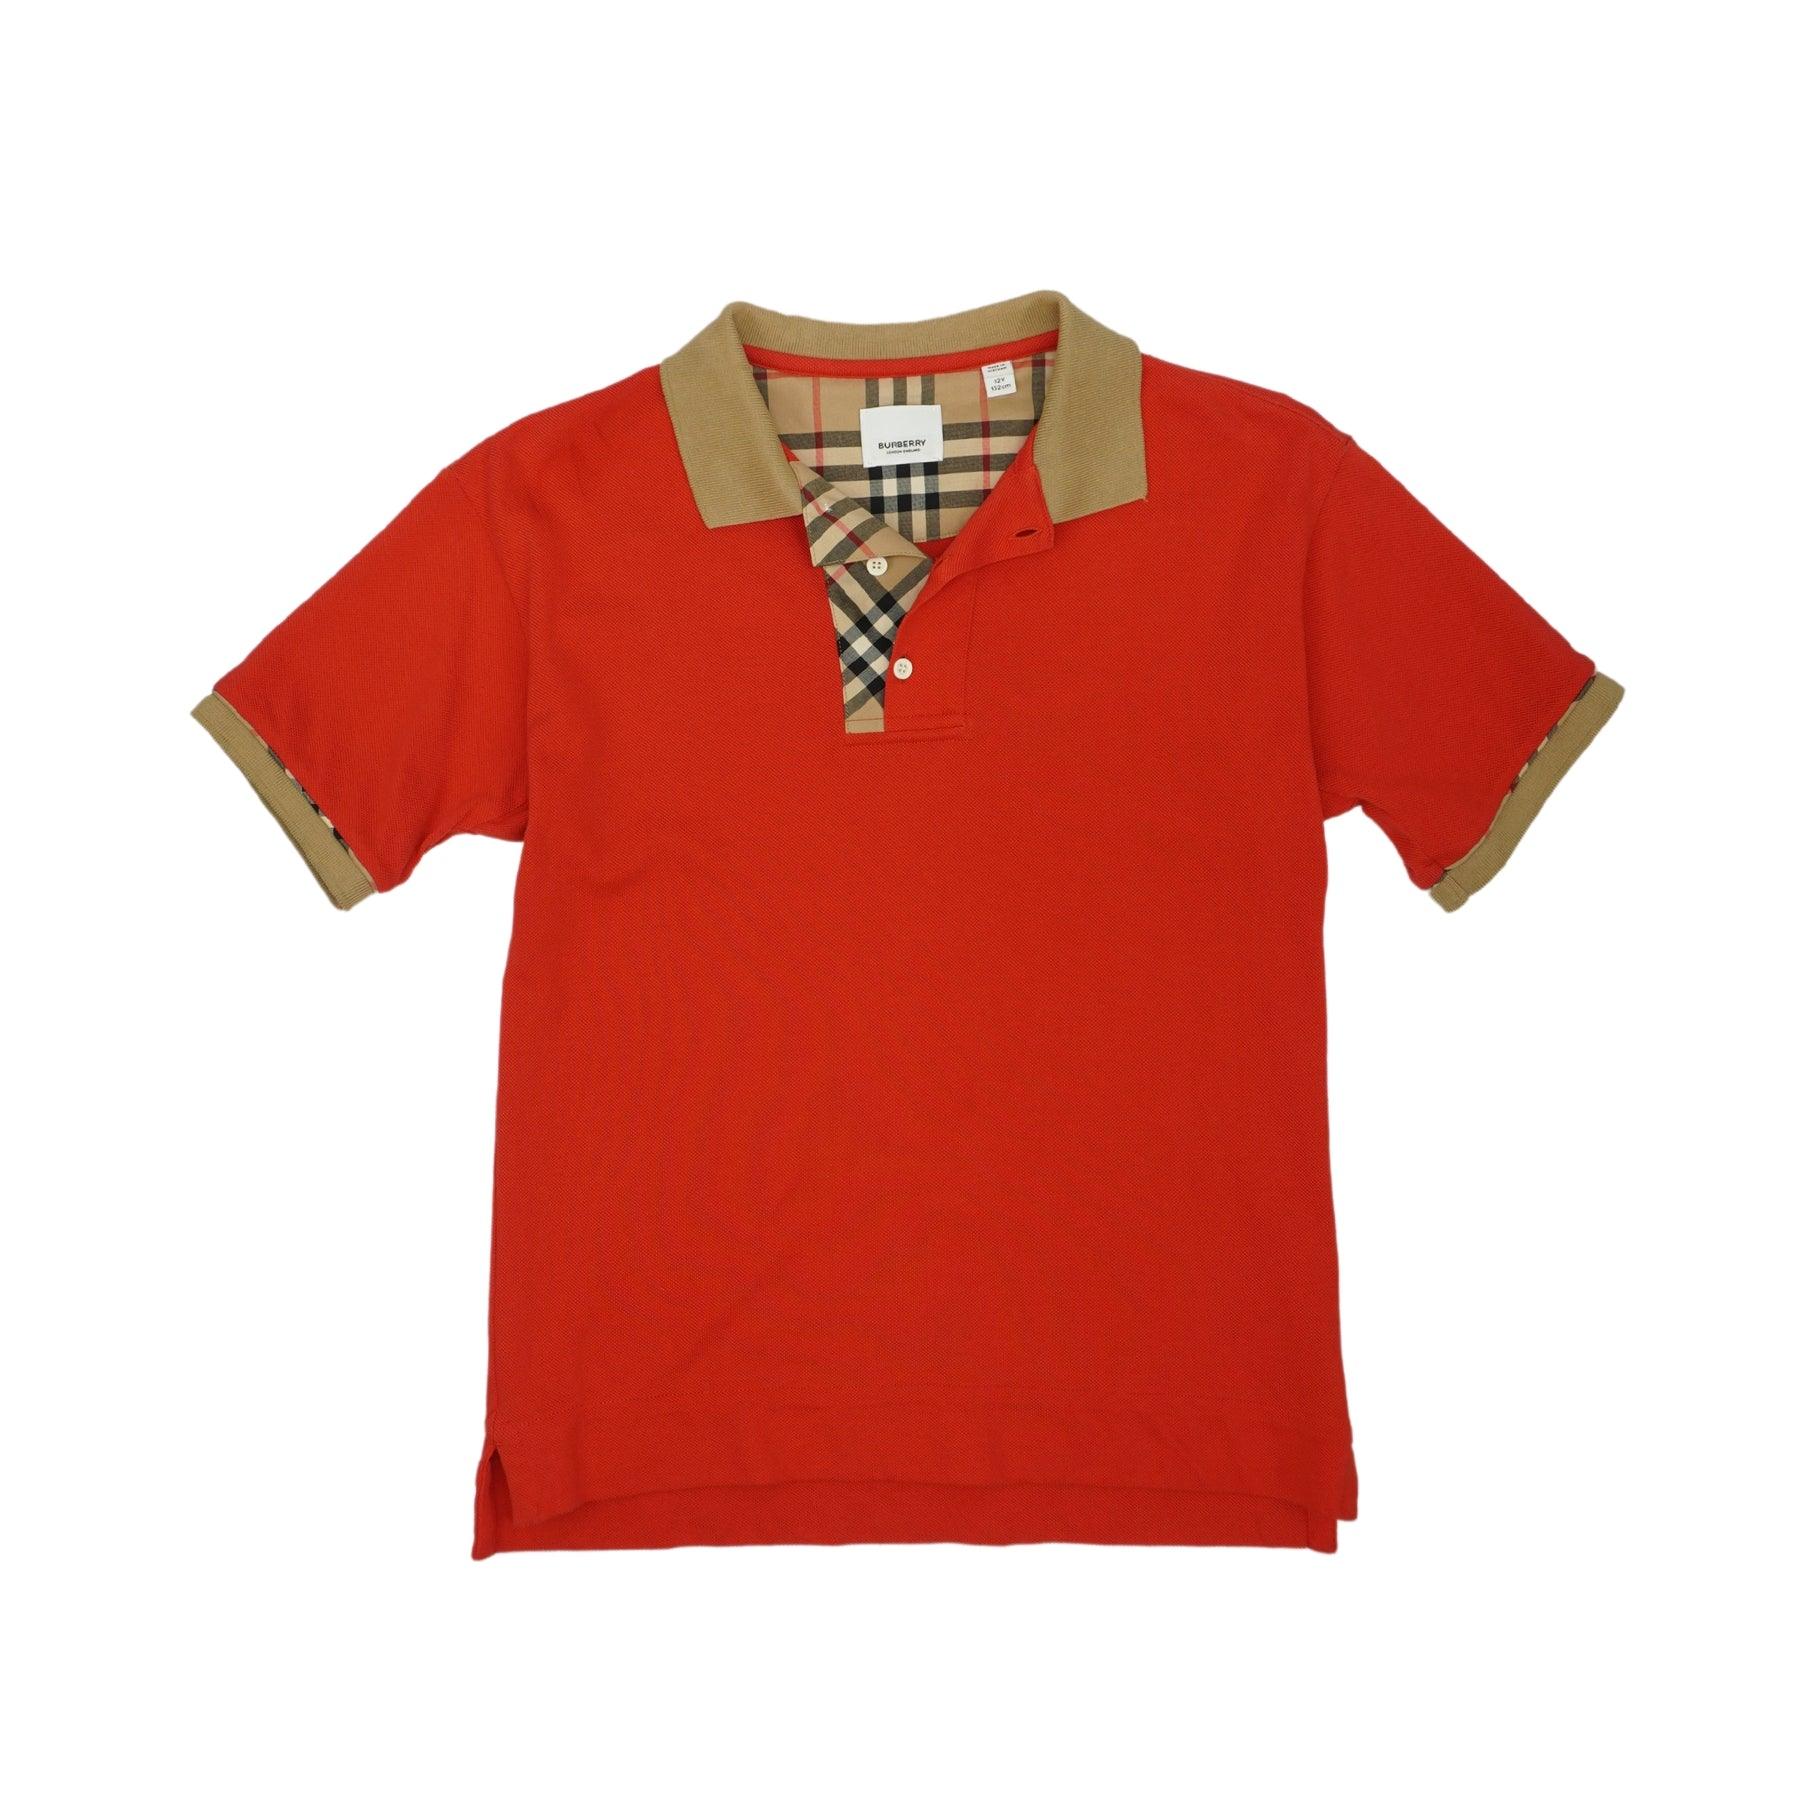 Burberry Top - Youth 12 - Fashionably Yours